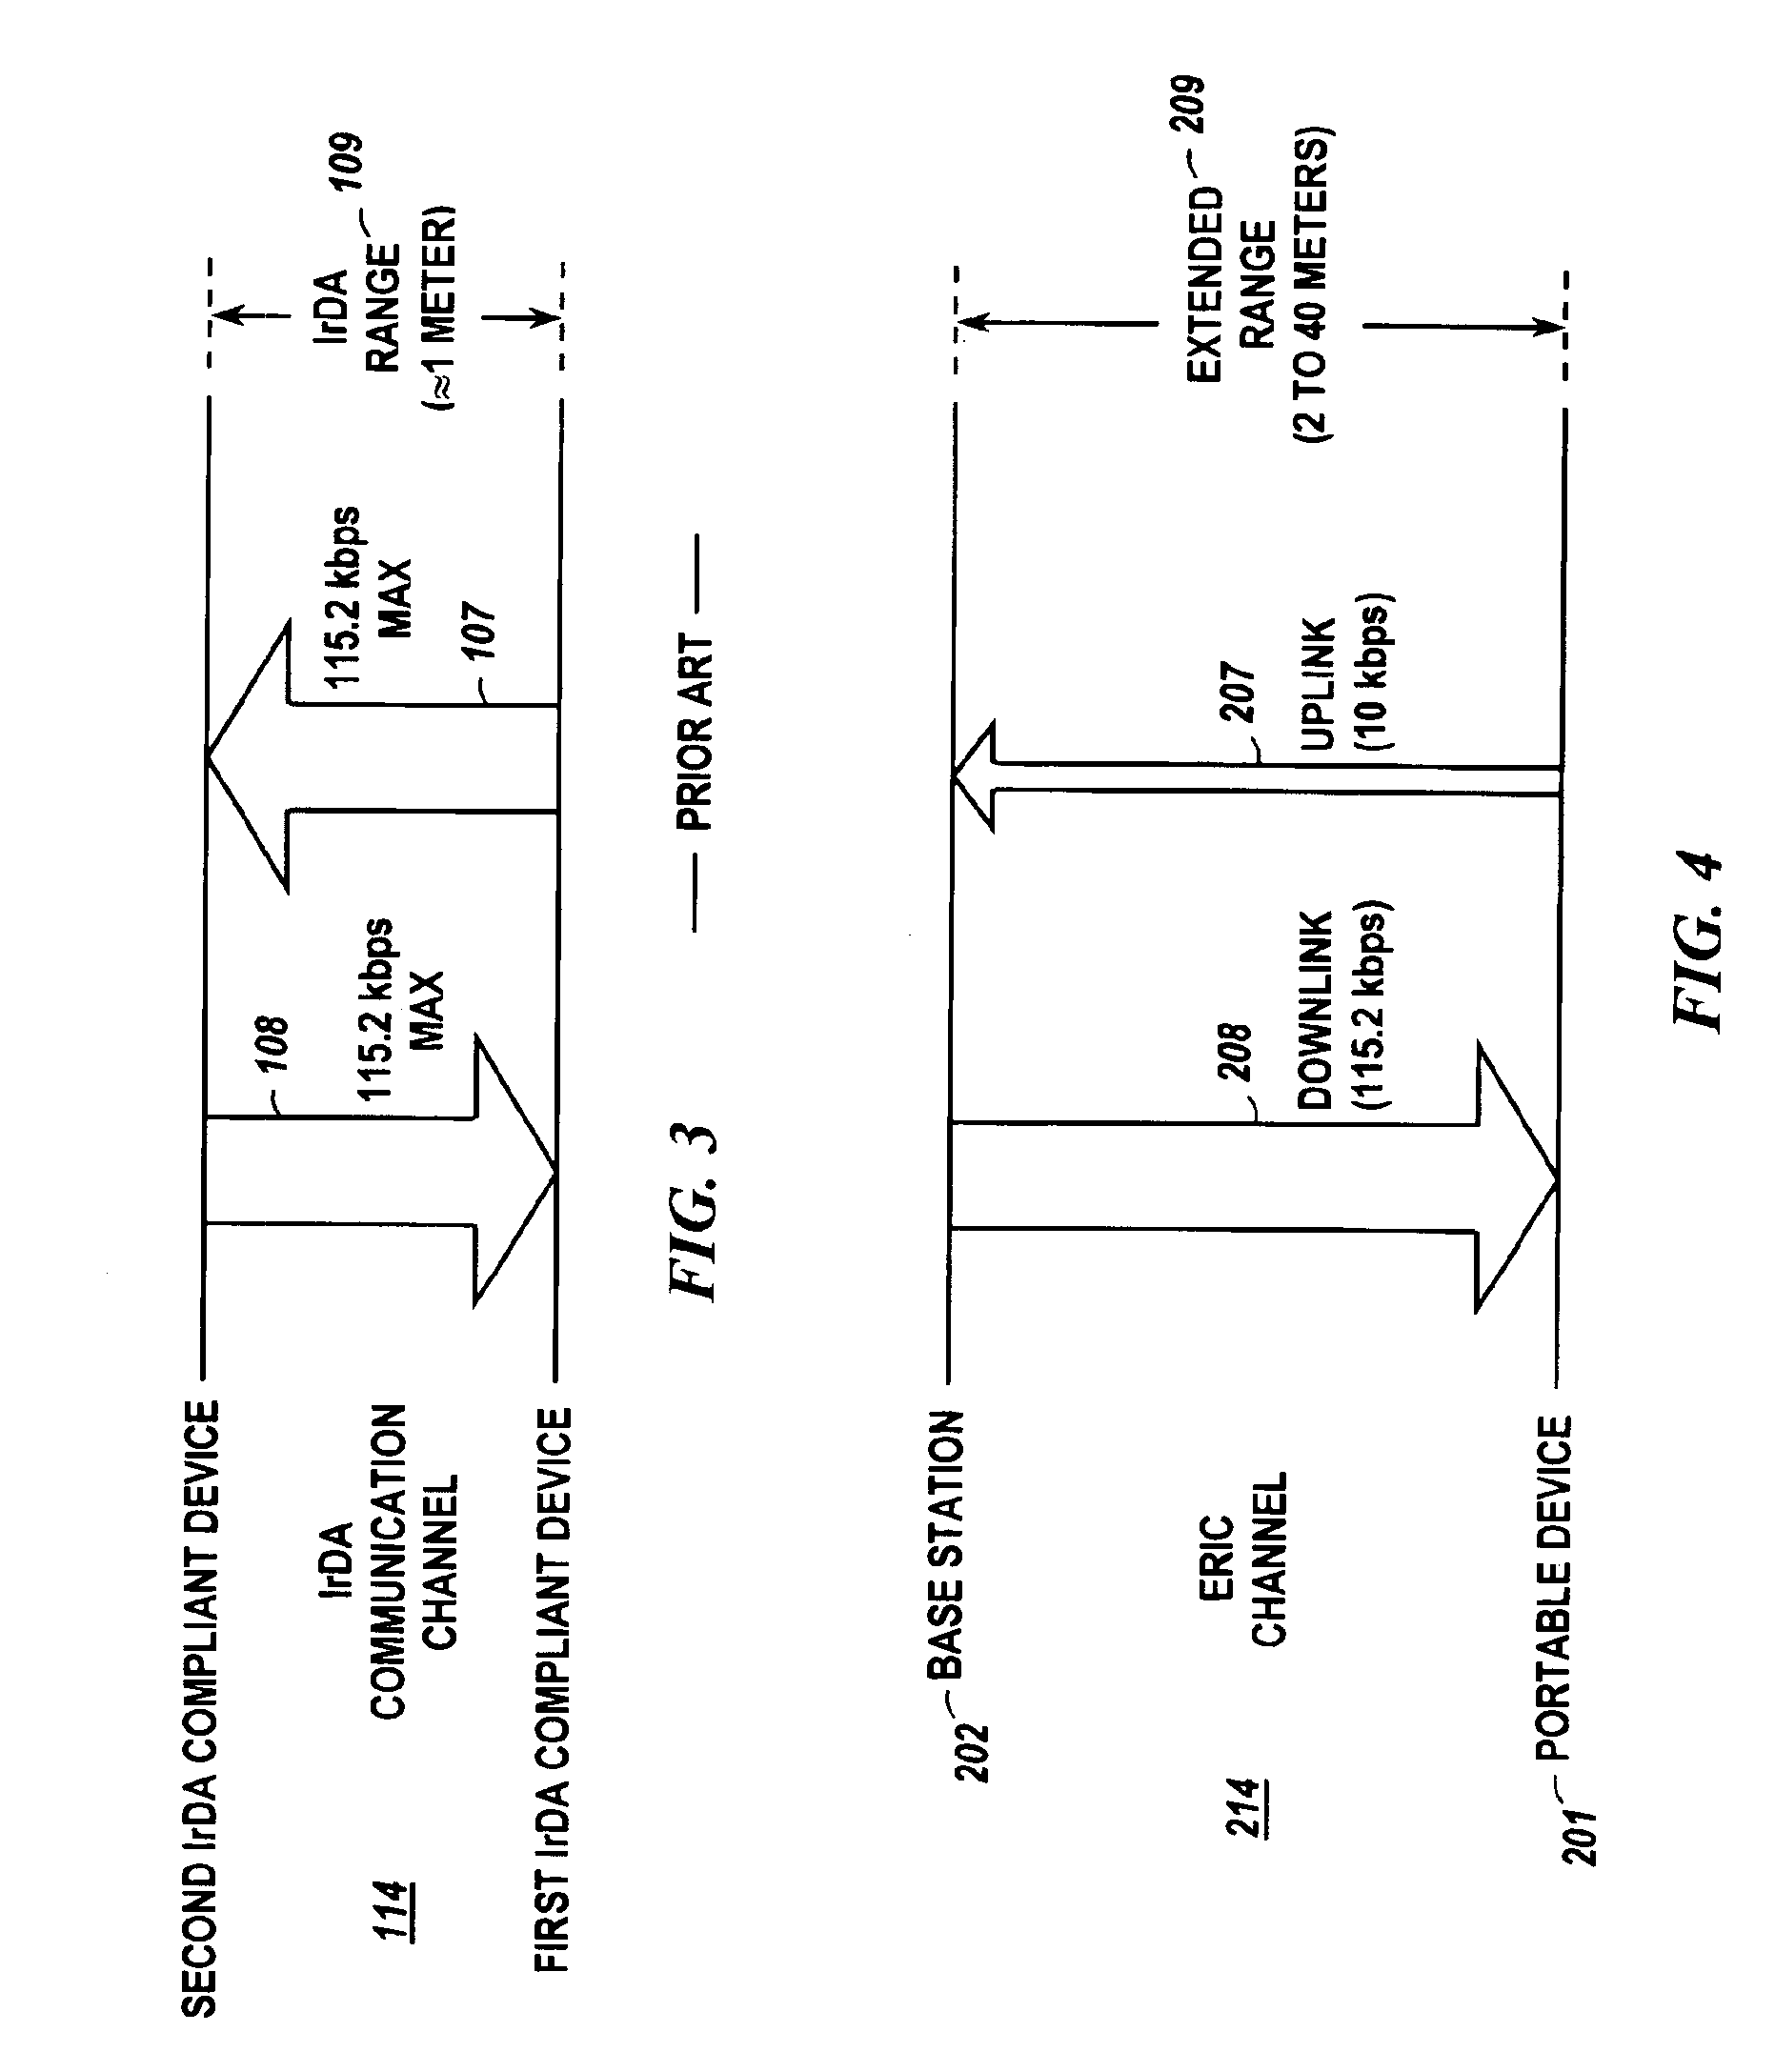 Extended range infrared communication (ERIC) for an infrared associated (IrDA) compliant portable device